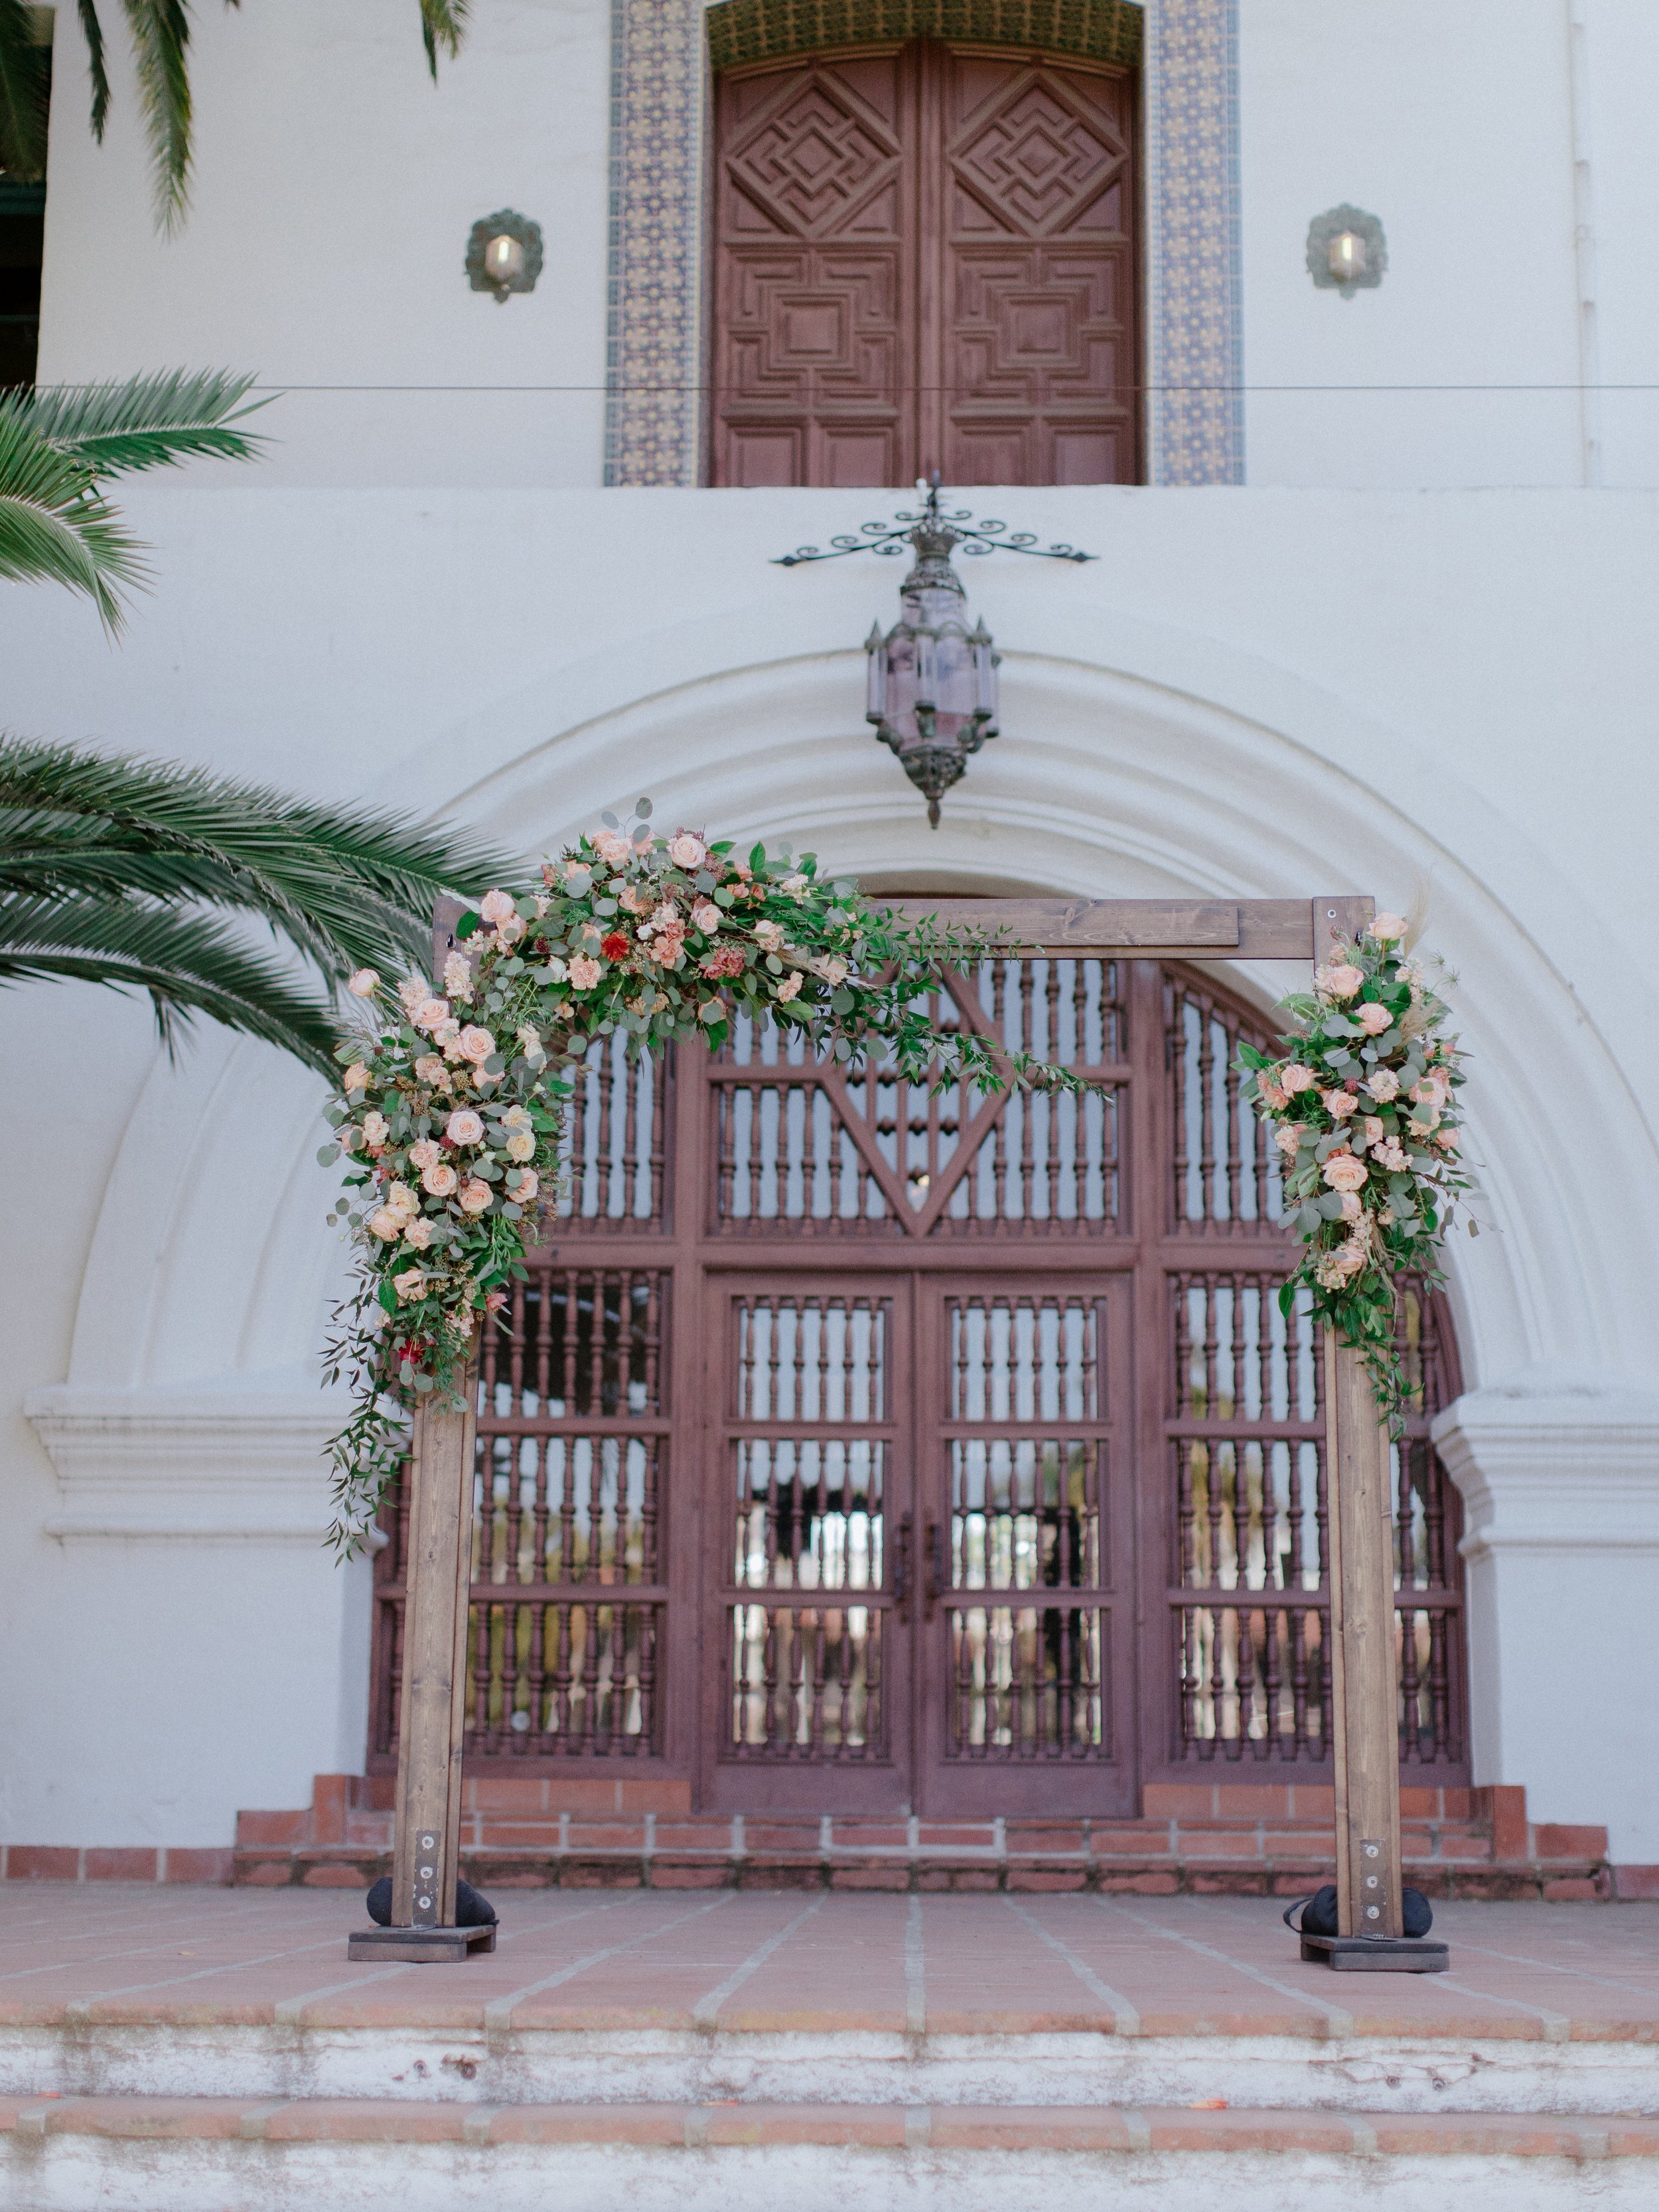 www.santabarbarawedding.com | Chris J. Evans | Santa Barbara Courthouse | Wedding Arch with Blush Florals and Greenery on the Steps of the Courthouse